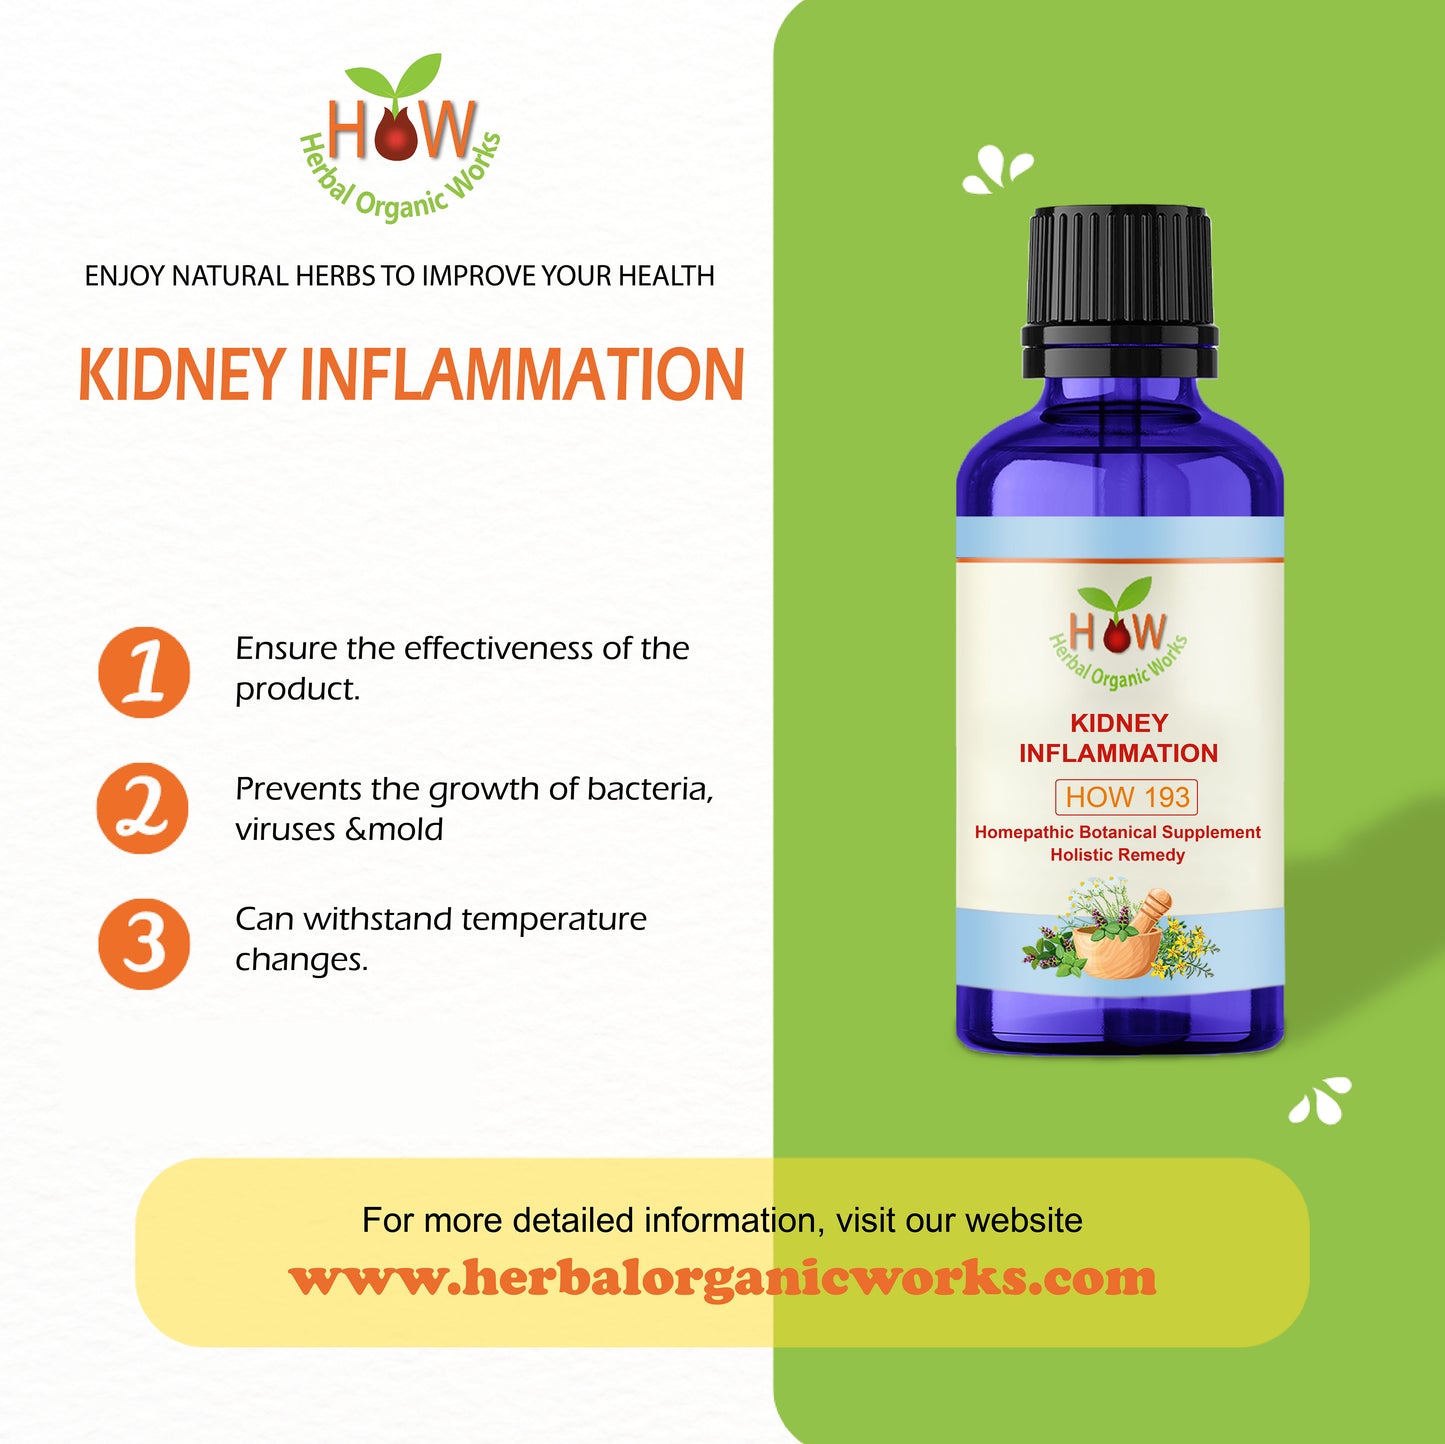 KIDNEY INFLAMMATION REMEDY (HOW193)